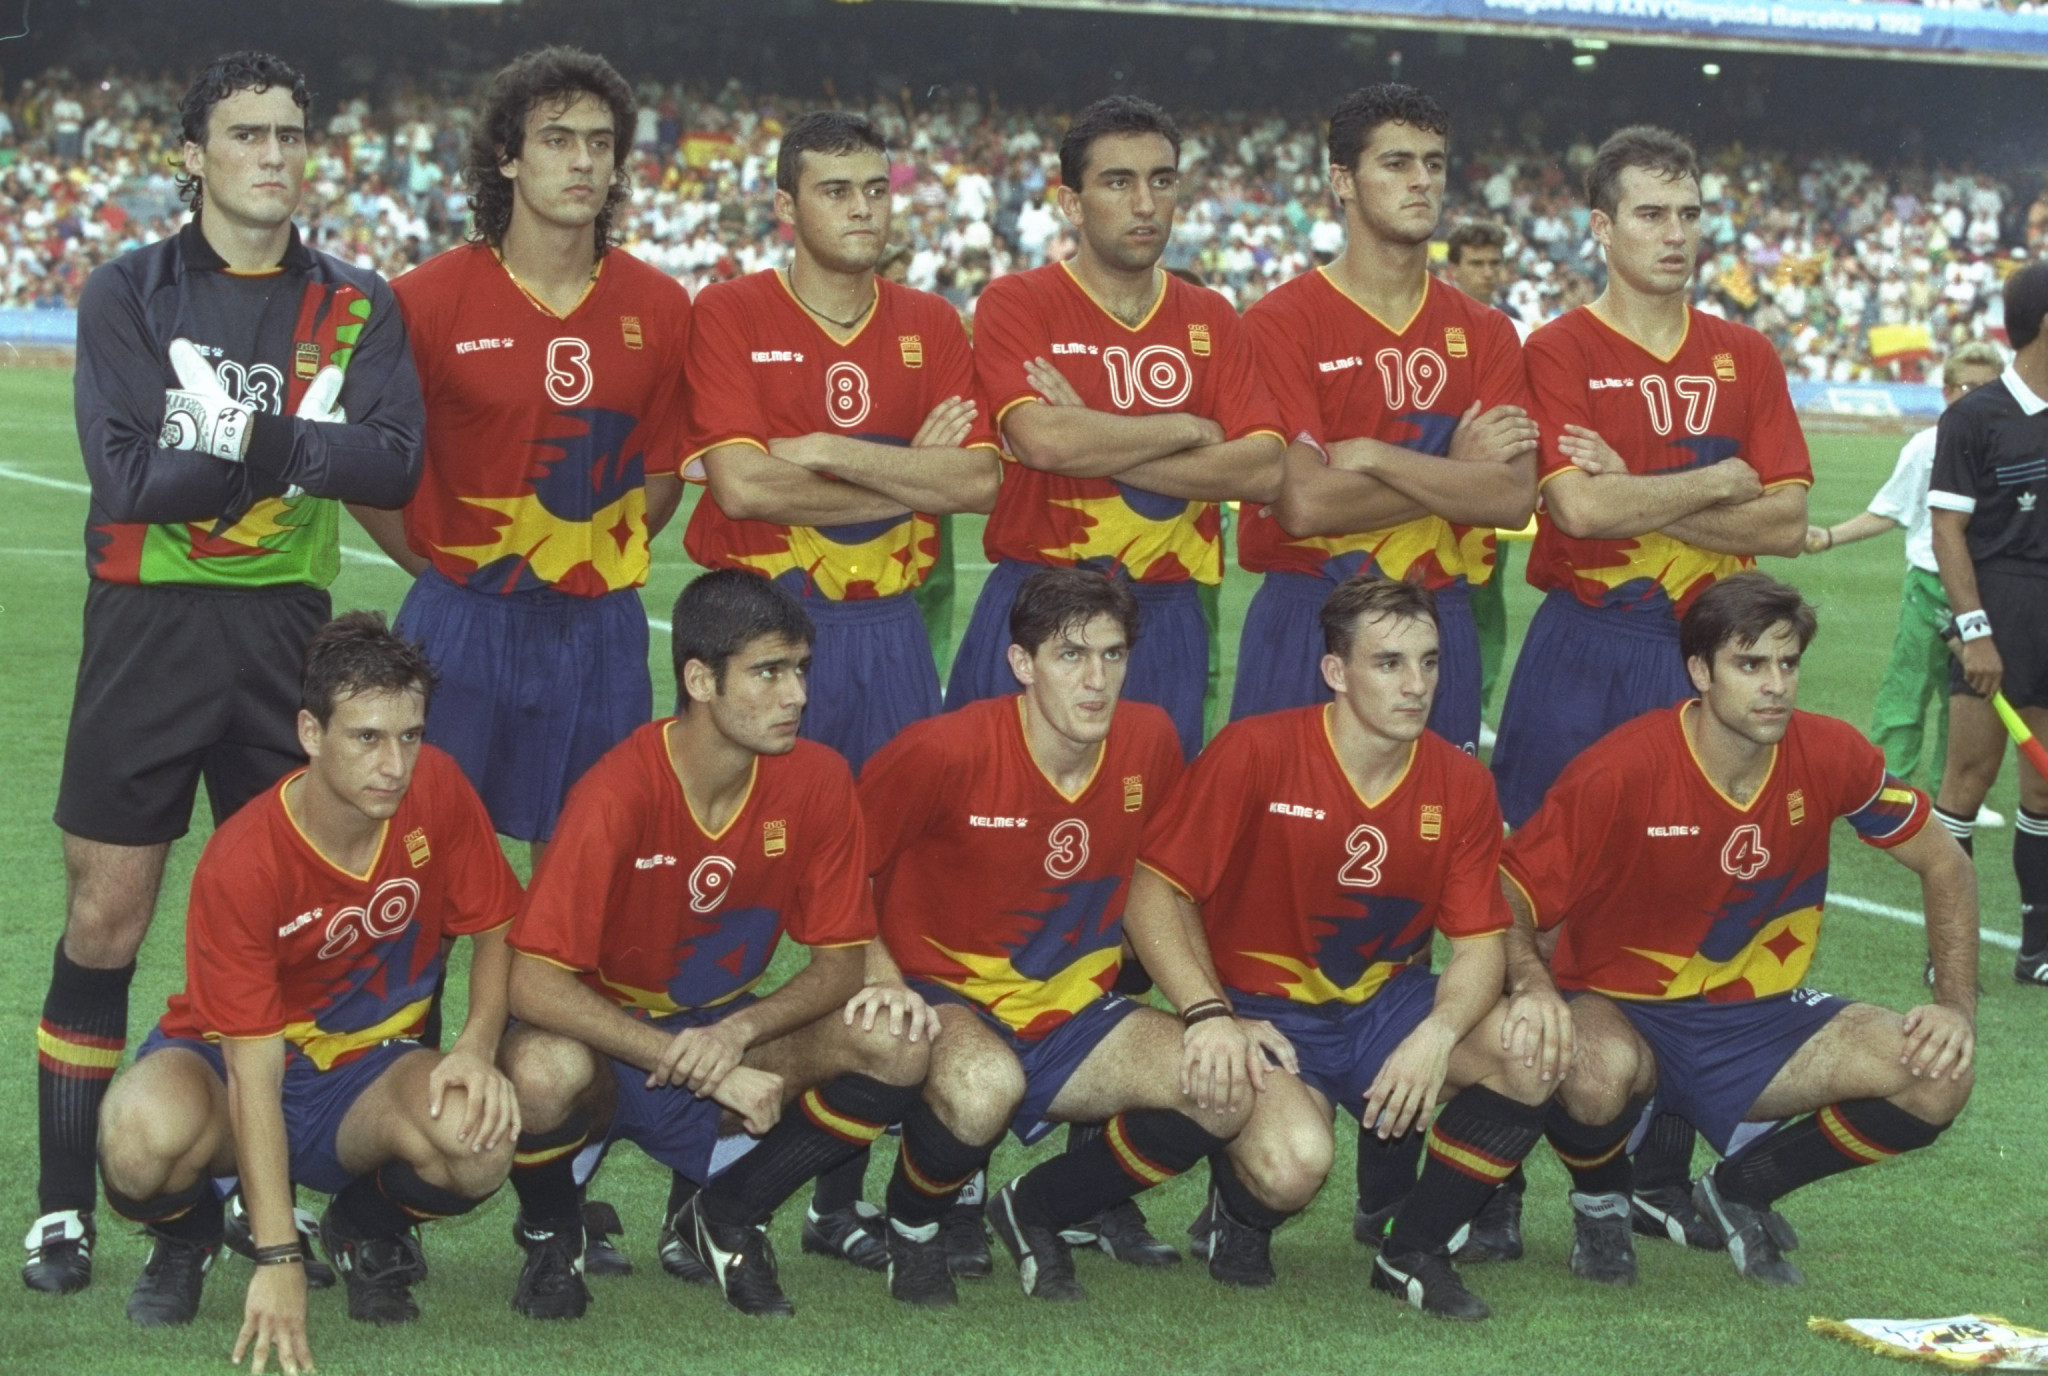 Spain went one better at Barcelona 1992, winning men's Olympic football gold as hosts ©Getty Images